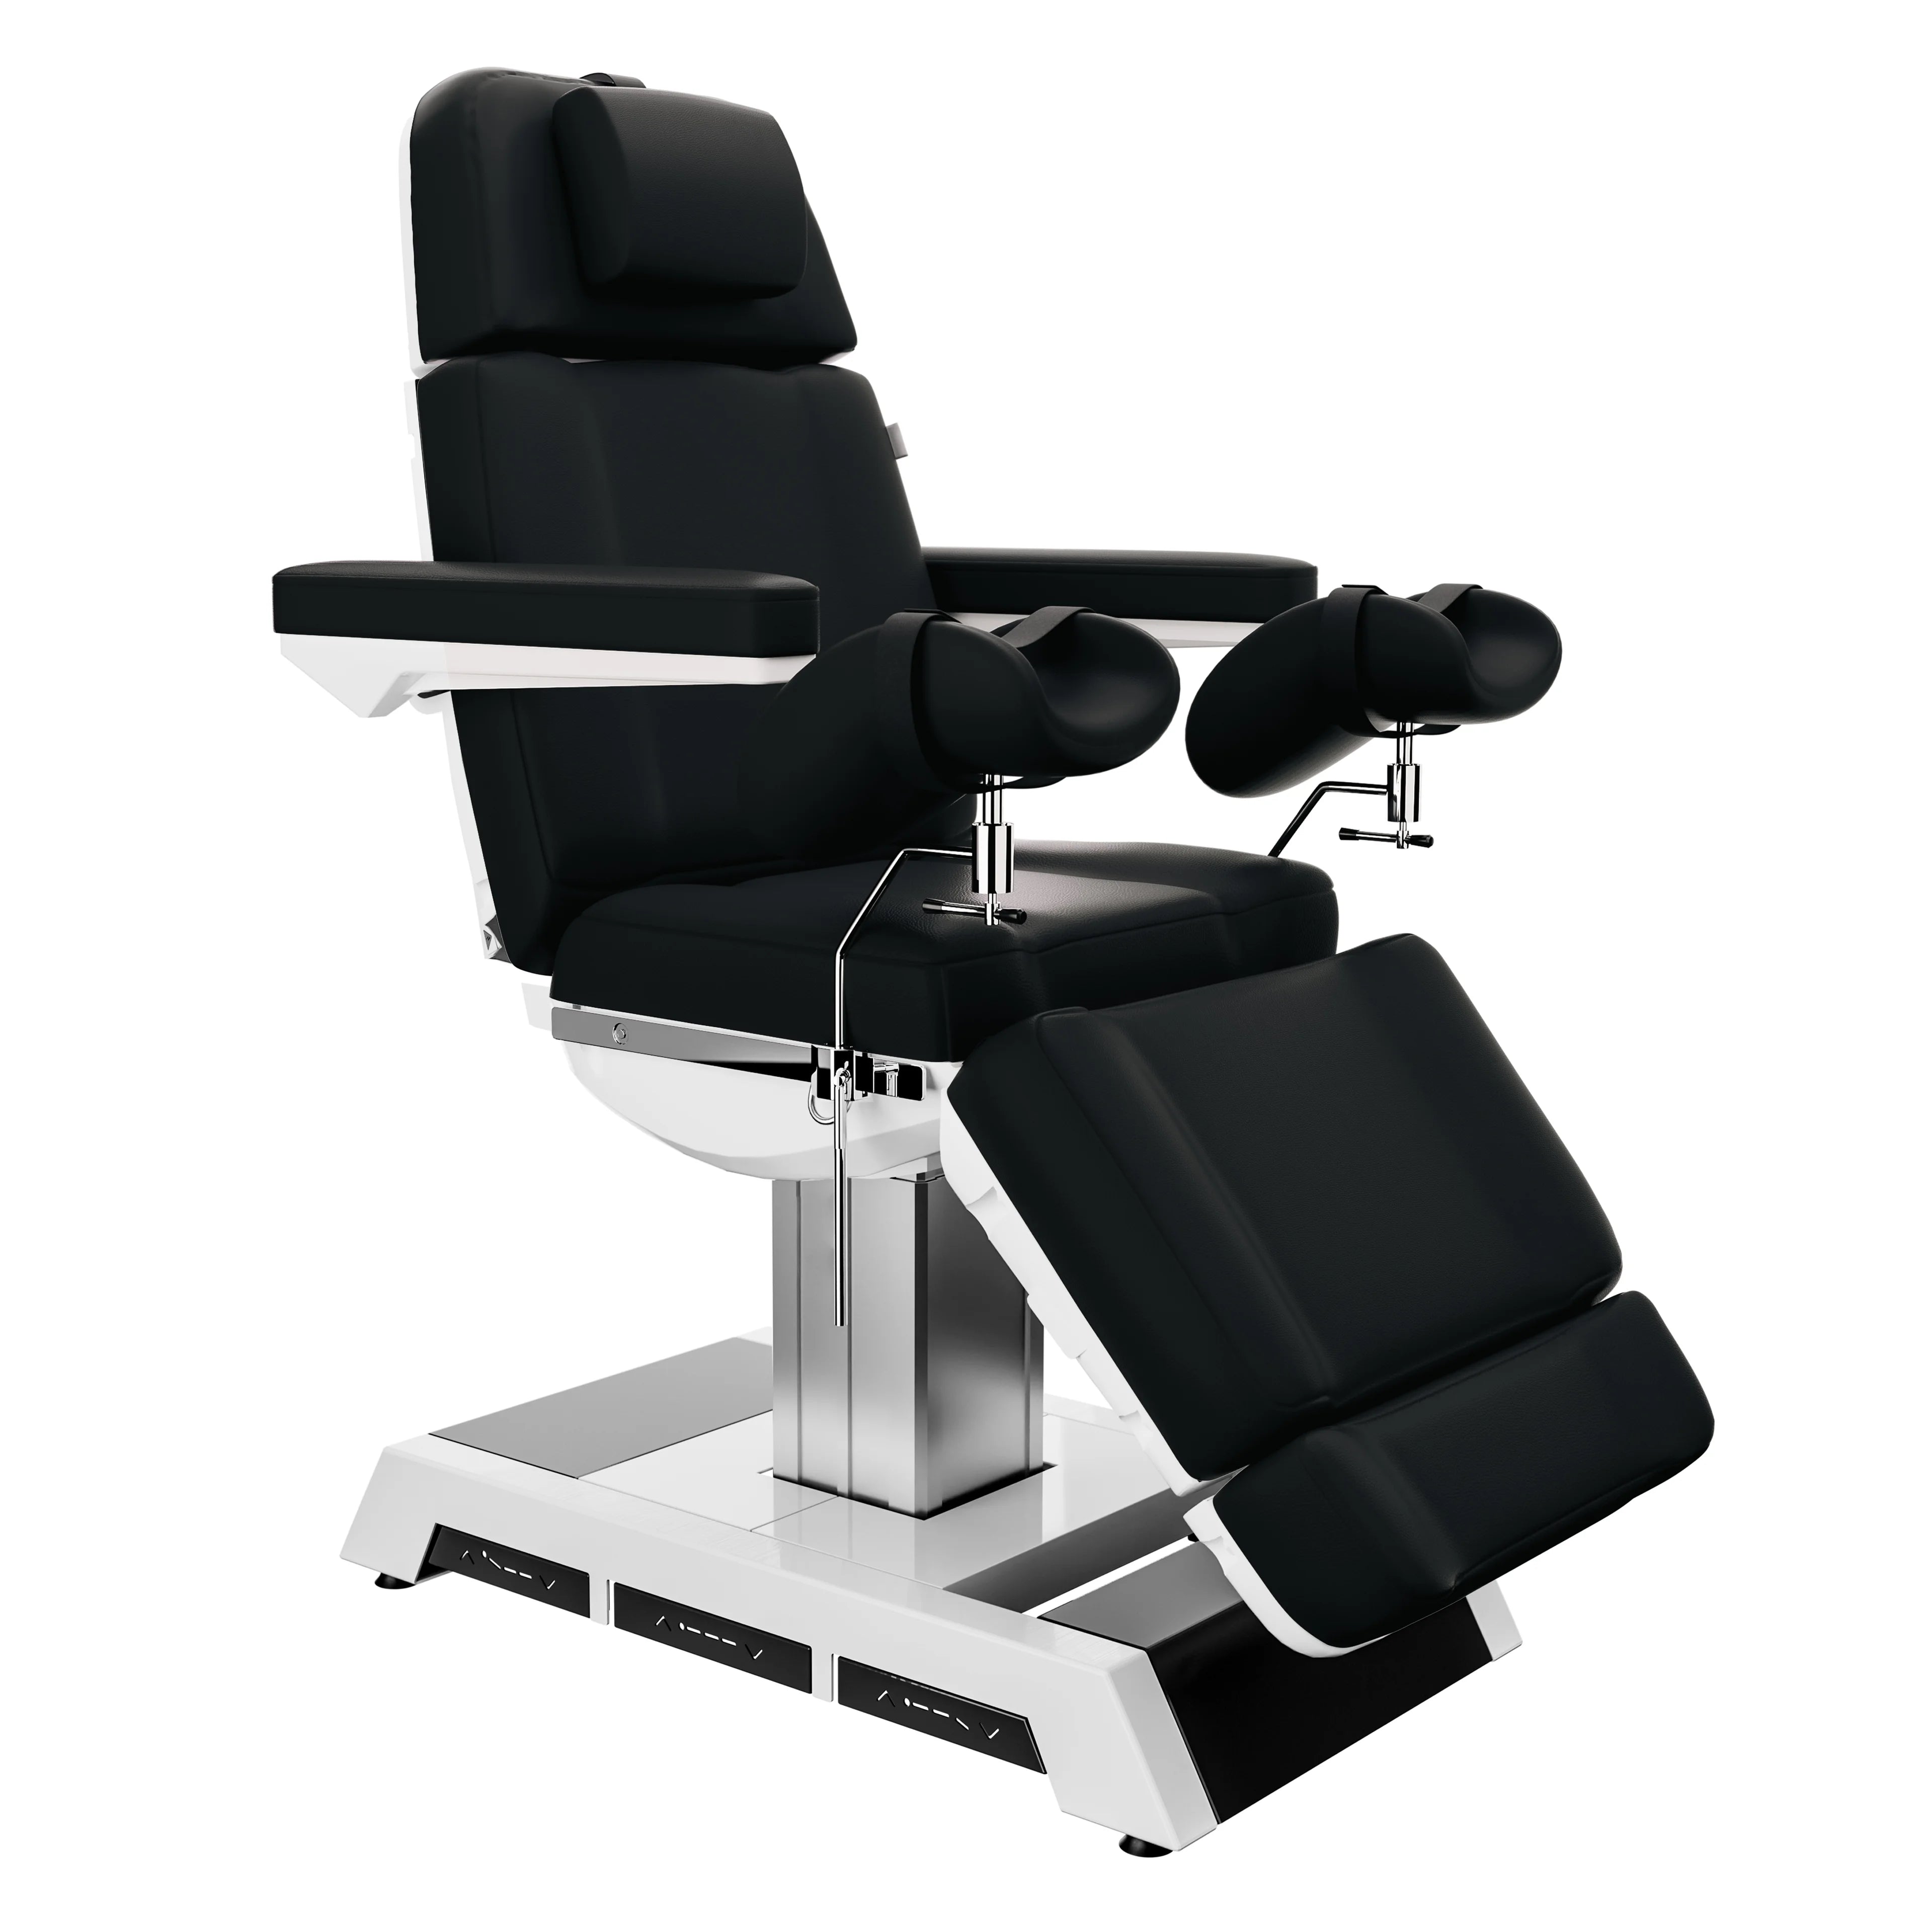 SPAMARC . Adones . OBGYN & GYNECOLOGY . STIRRUPS . 4 MOTOR SPA TREATMENT CHAIR/BED